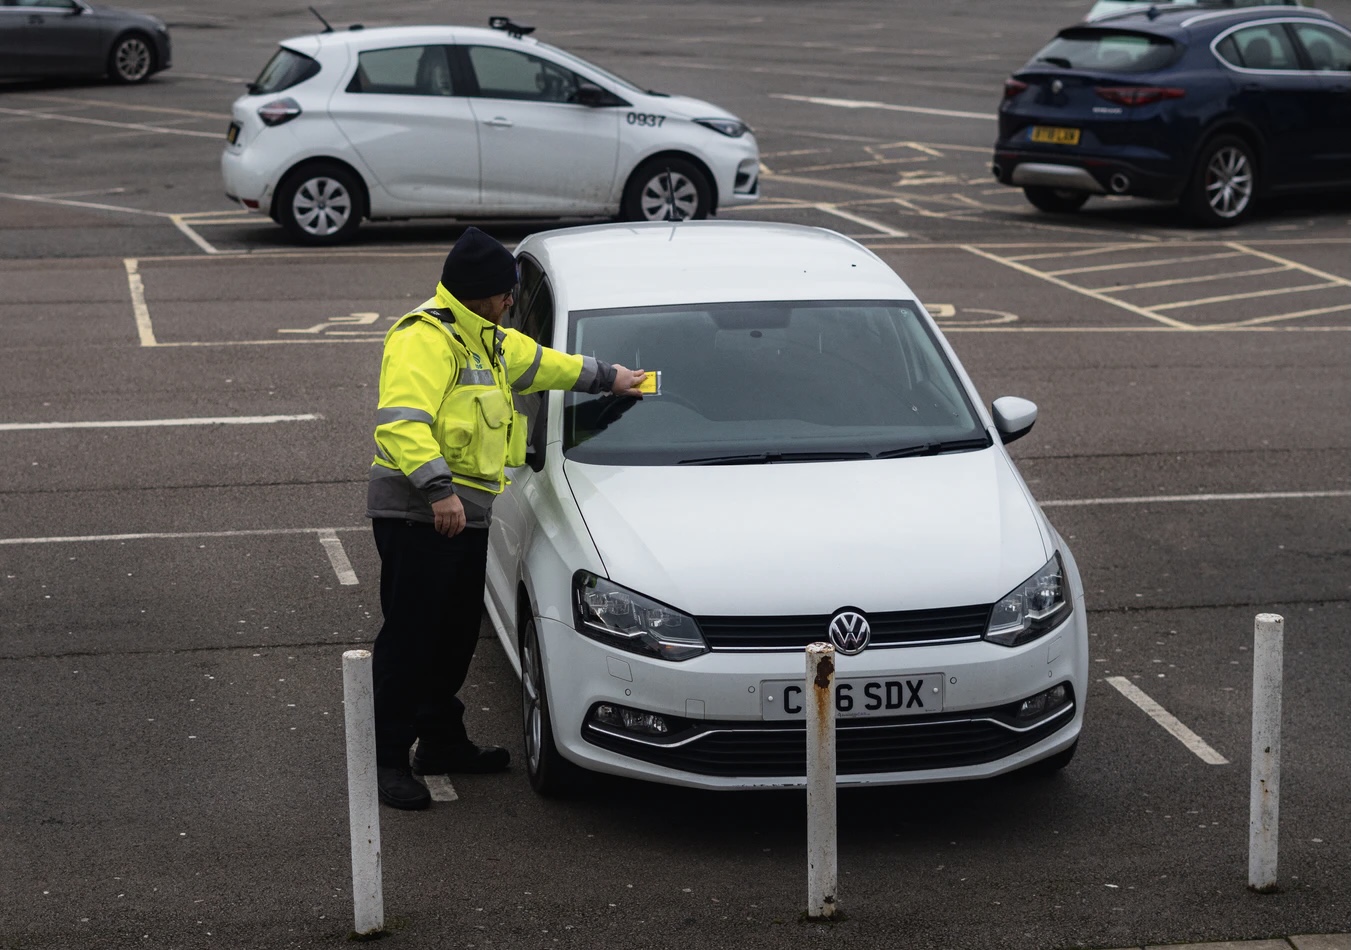 NEWS | Plans to cap the cost of parking fines have been temporarily withdrawn after parking firms objected to proposals